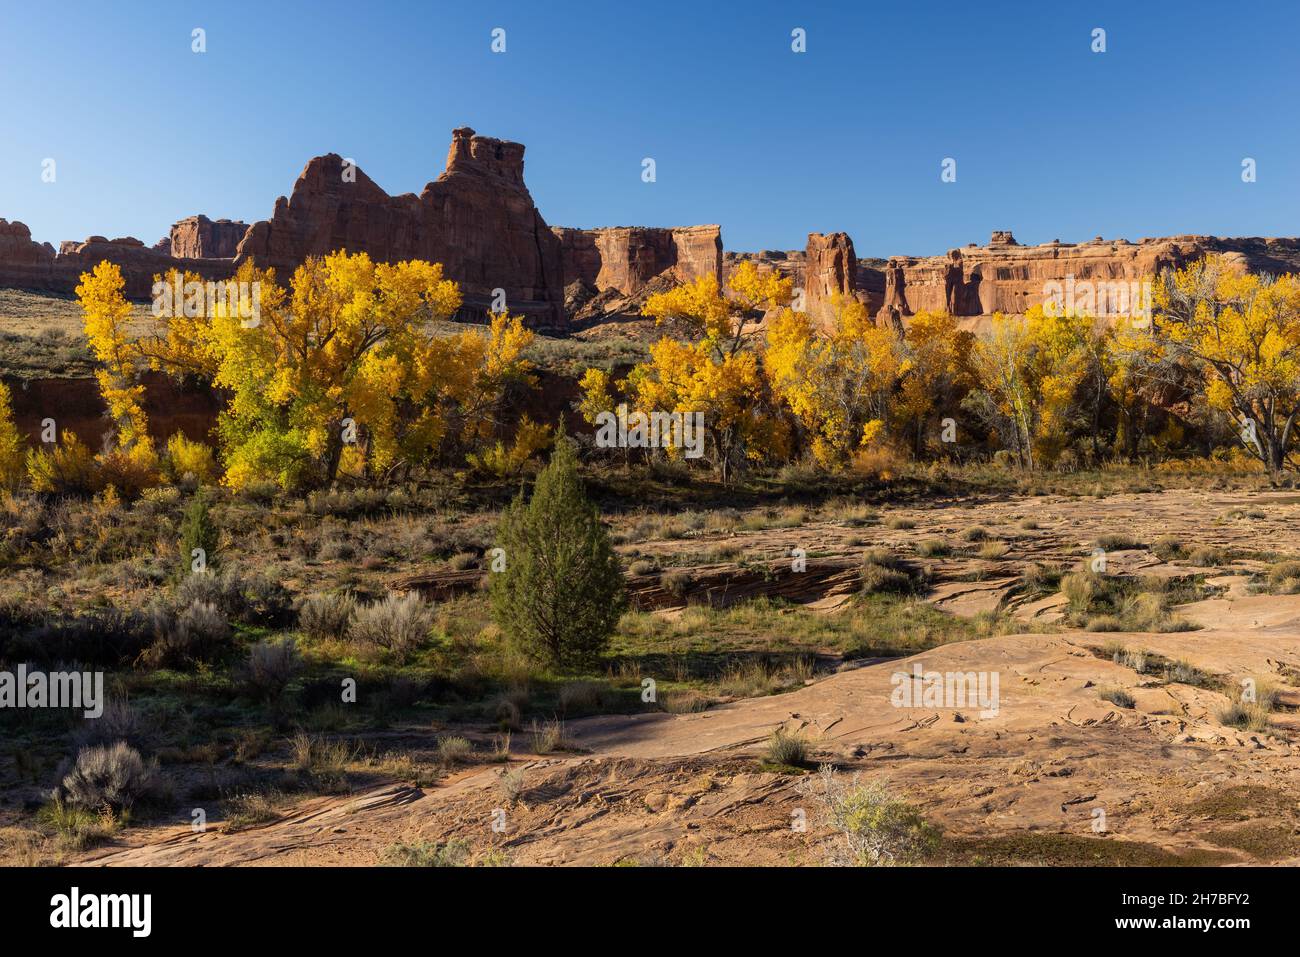 Fremont cottonwoods (Populus fremontii) lungo il Courthouse Wash in autunno, Arches National Park, Utah Foto Stock